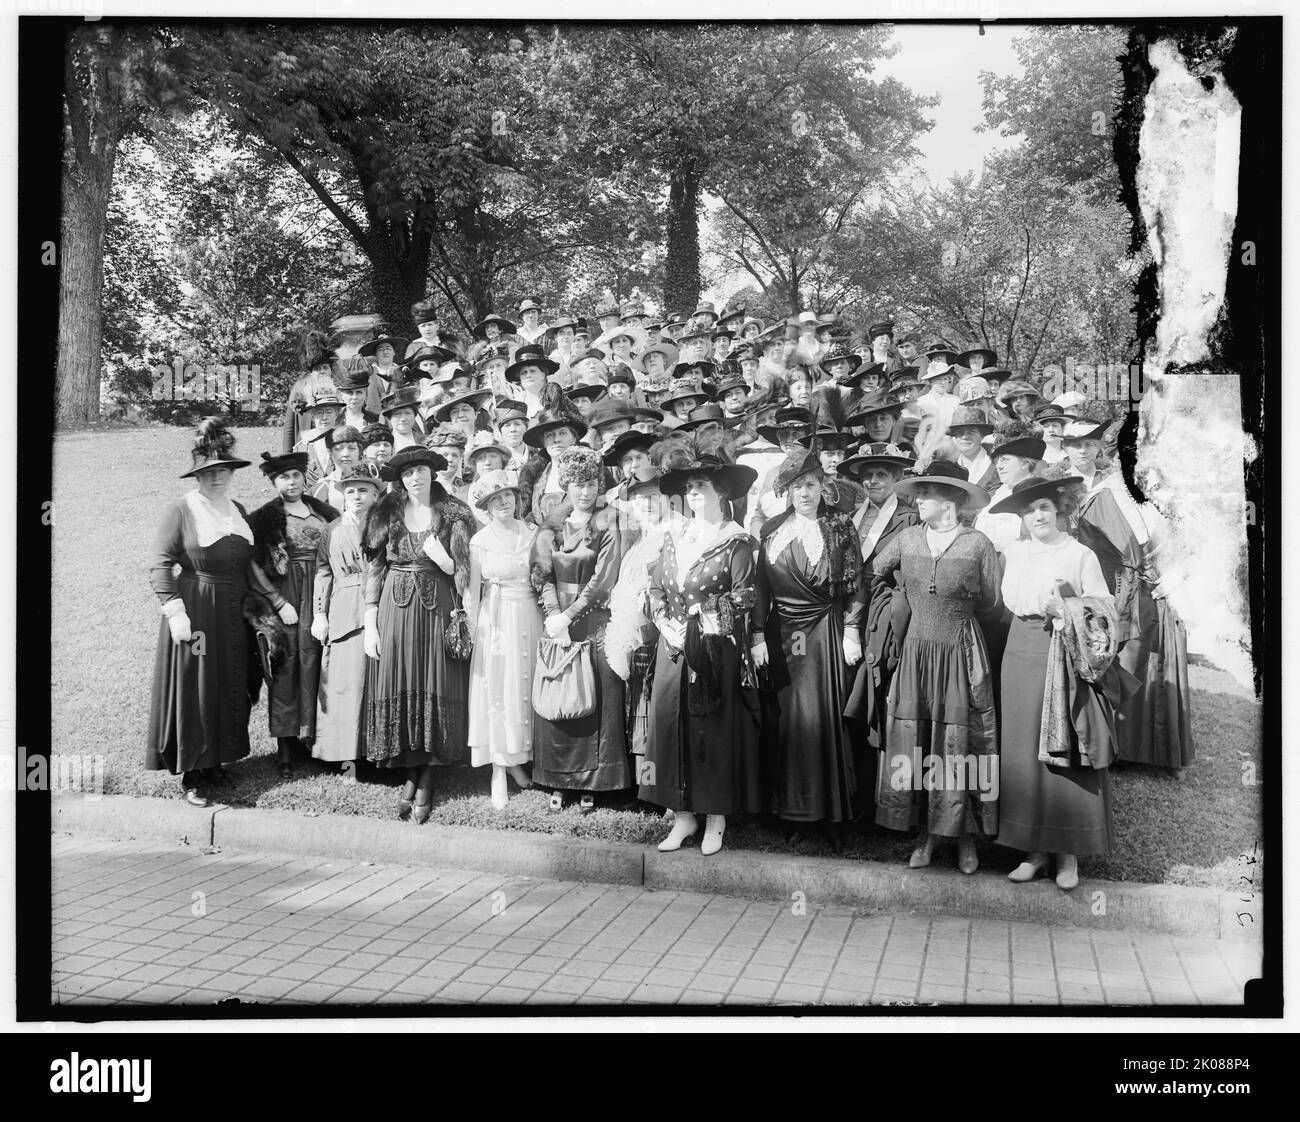 Woman's Liberty Loan Committee, between 1910 and 1920. First World War, USA. 'Dr. Anna Howard Shaw and Mrs. William G. McAdoo near right'. Shaw was a doctor, a leader of the women's suffrage movement, and one of the first ordained female Methodist ministers in the United States. Writer and acitivist Eleanor Wilson McAdoo was a daughter of US president Woodrow Wilson. Stock Photo